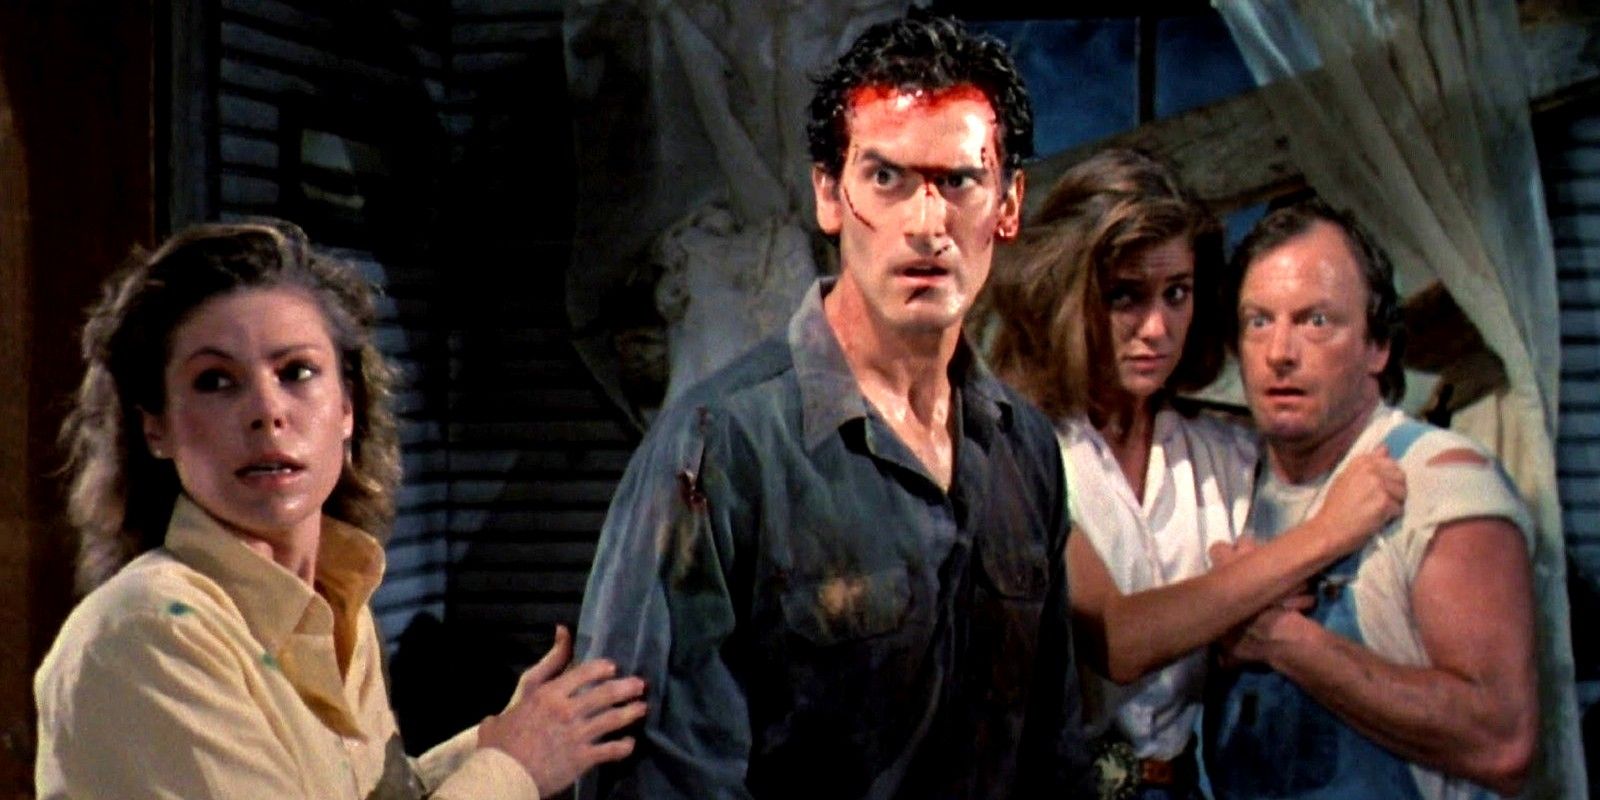 Bruce Campbell as Ash along with Annie, Jake, and Bobby in Evil Dead II